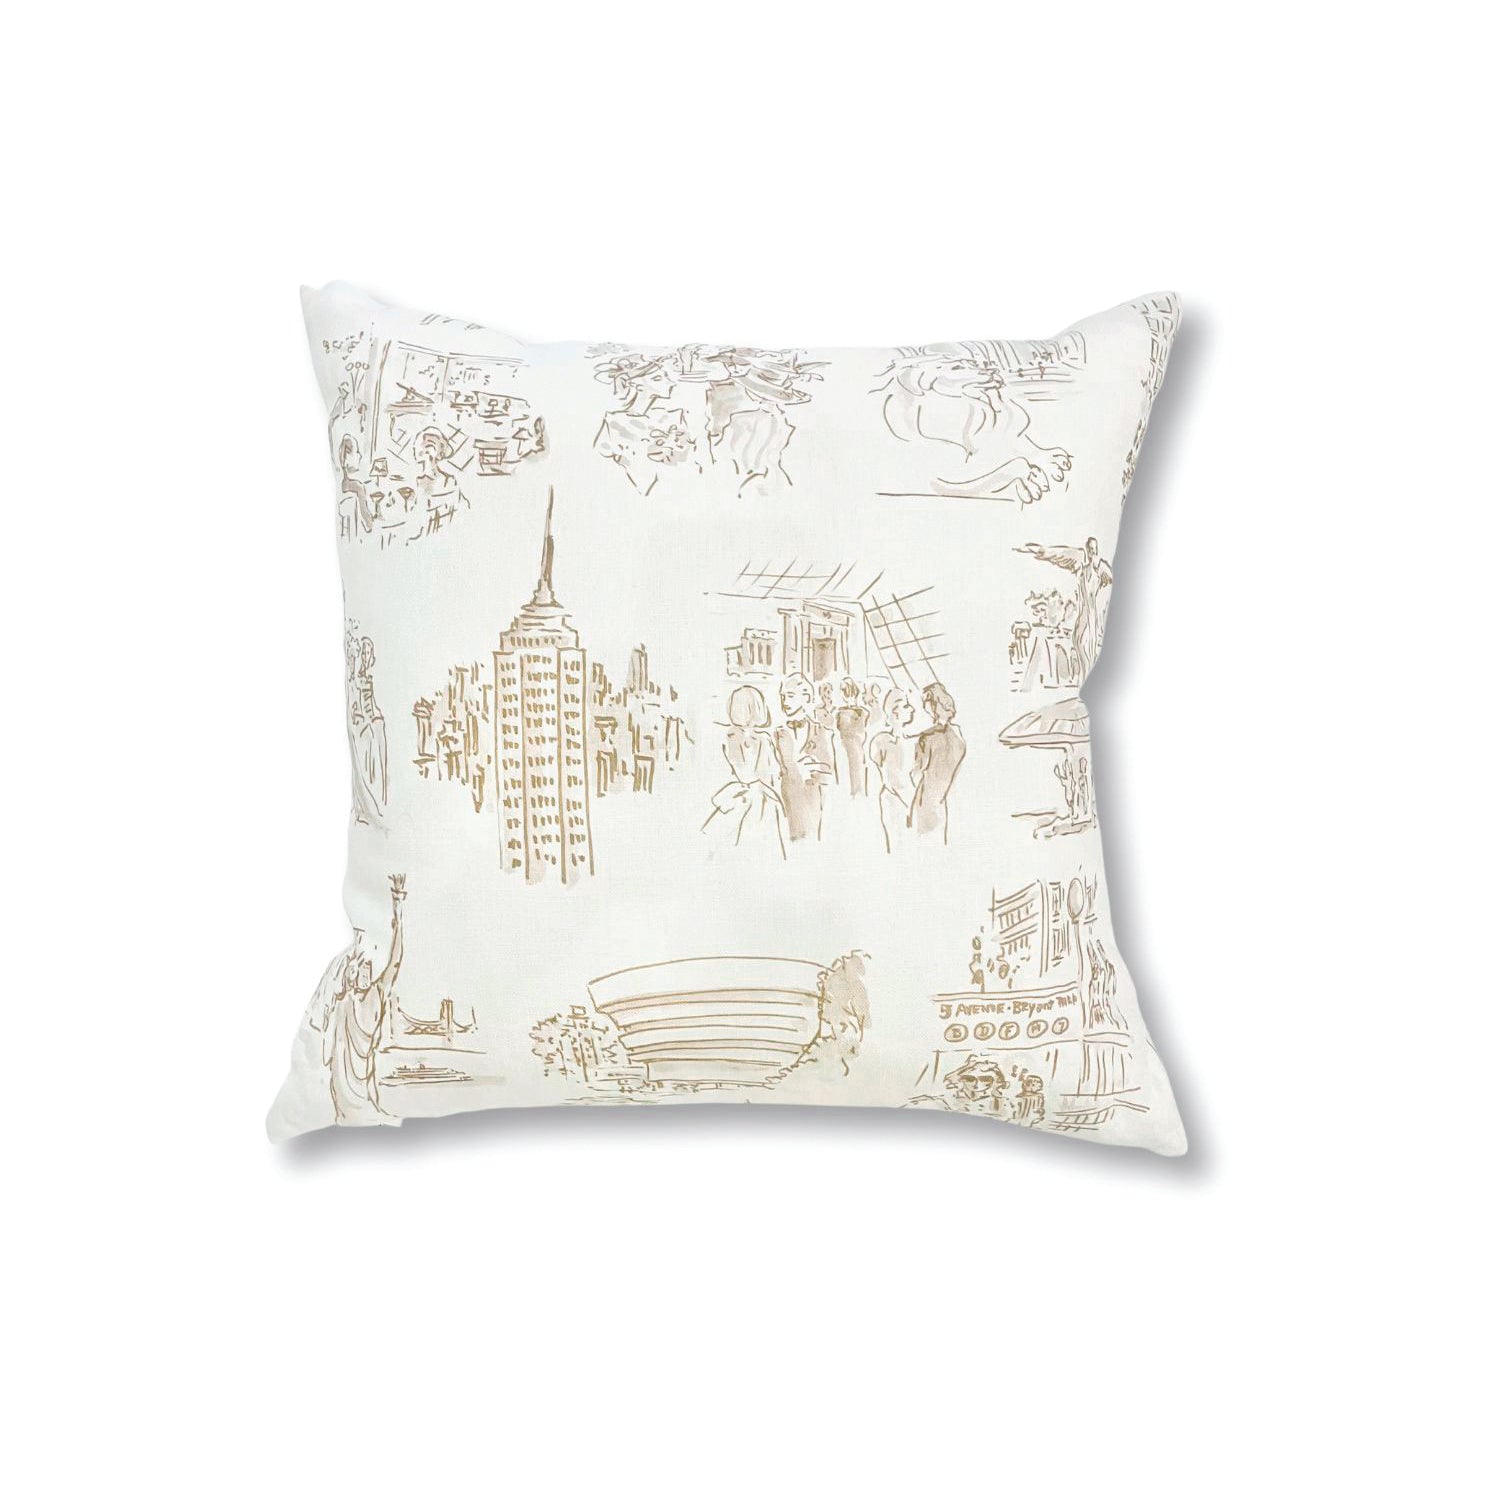 Square throw pillow with a pattern of sepia tone hand-drawn illustrations of New York City landmarks on a beige field.